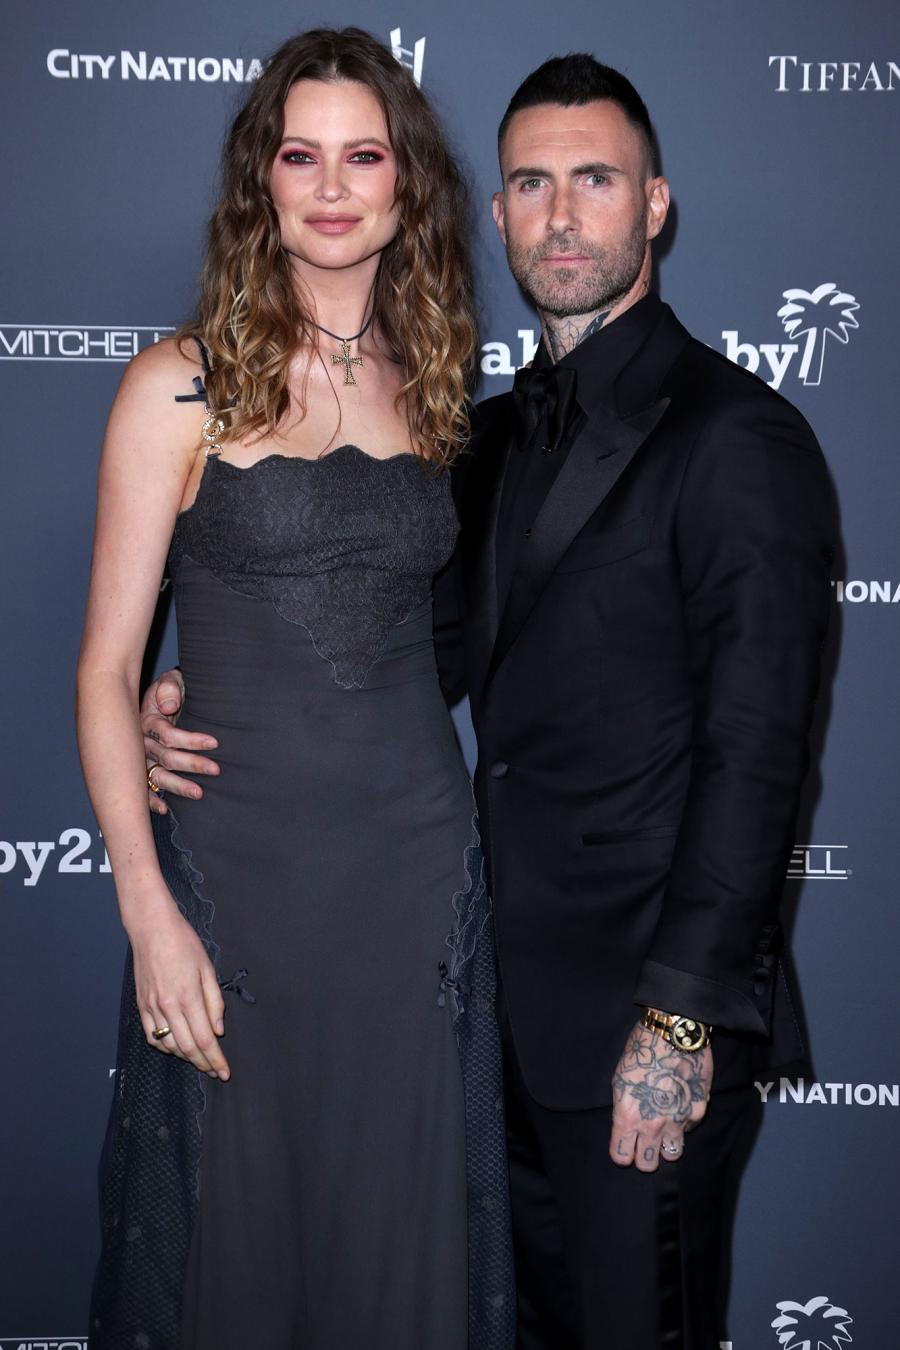 August 2021 Adam Levine Candid Marriage Quotes About Behati Prinsloo Before Cheating Allegations